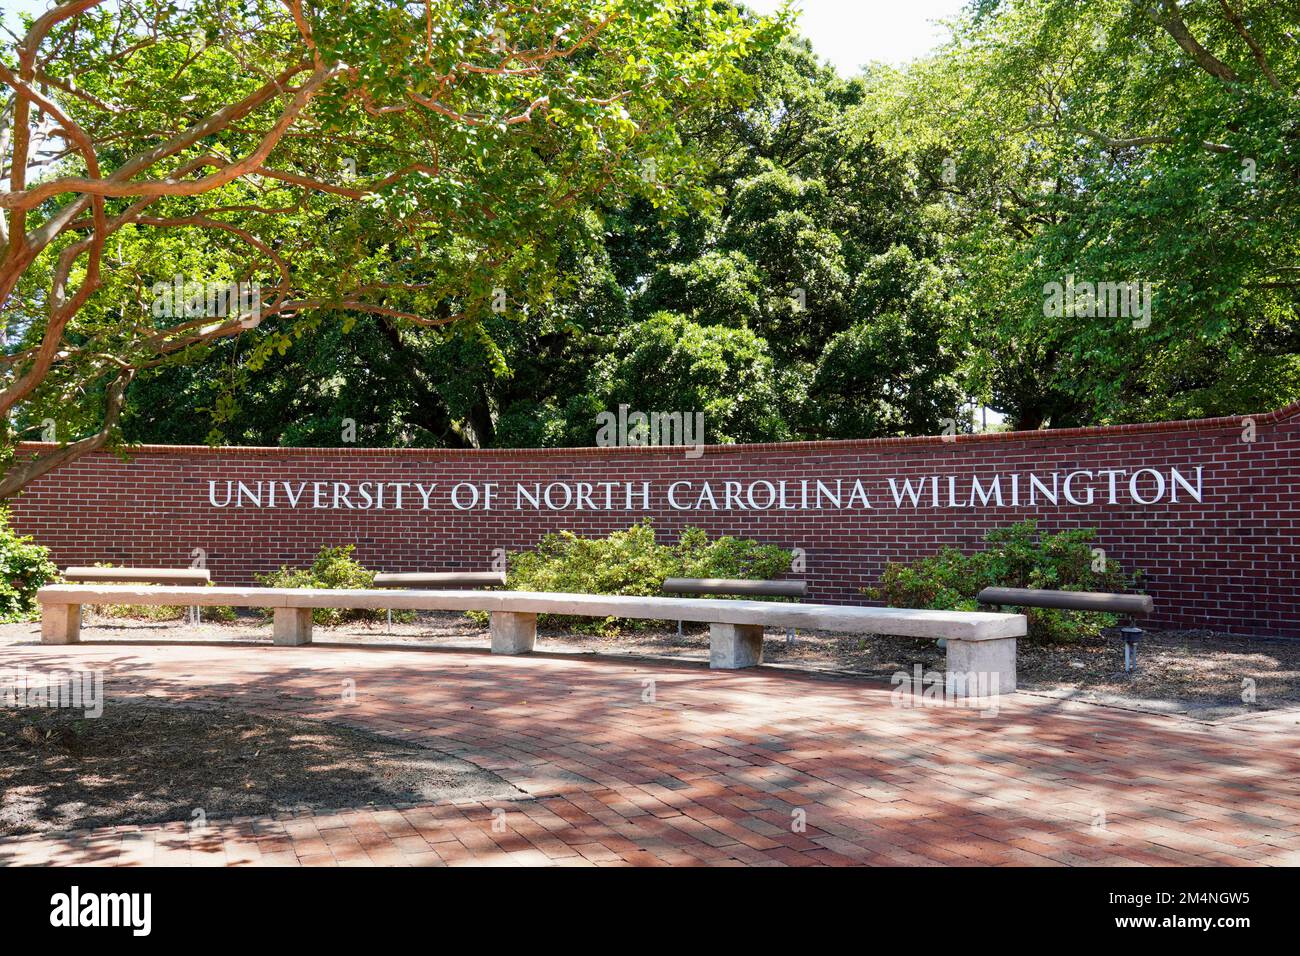 Sign for the University of North Carolina at Wilmington at the entrance to campus. Stock Photo